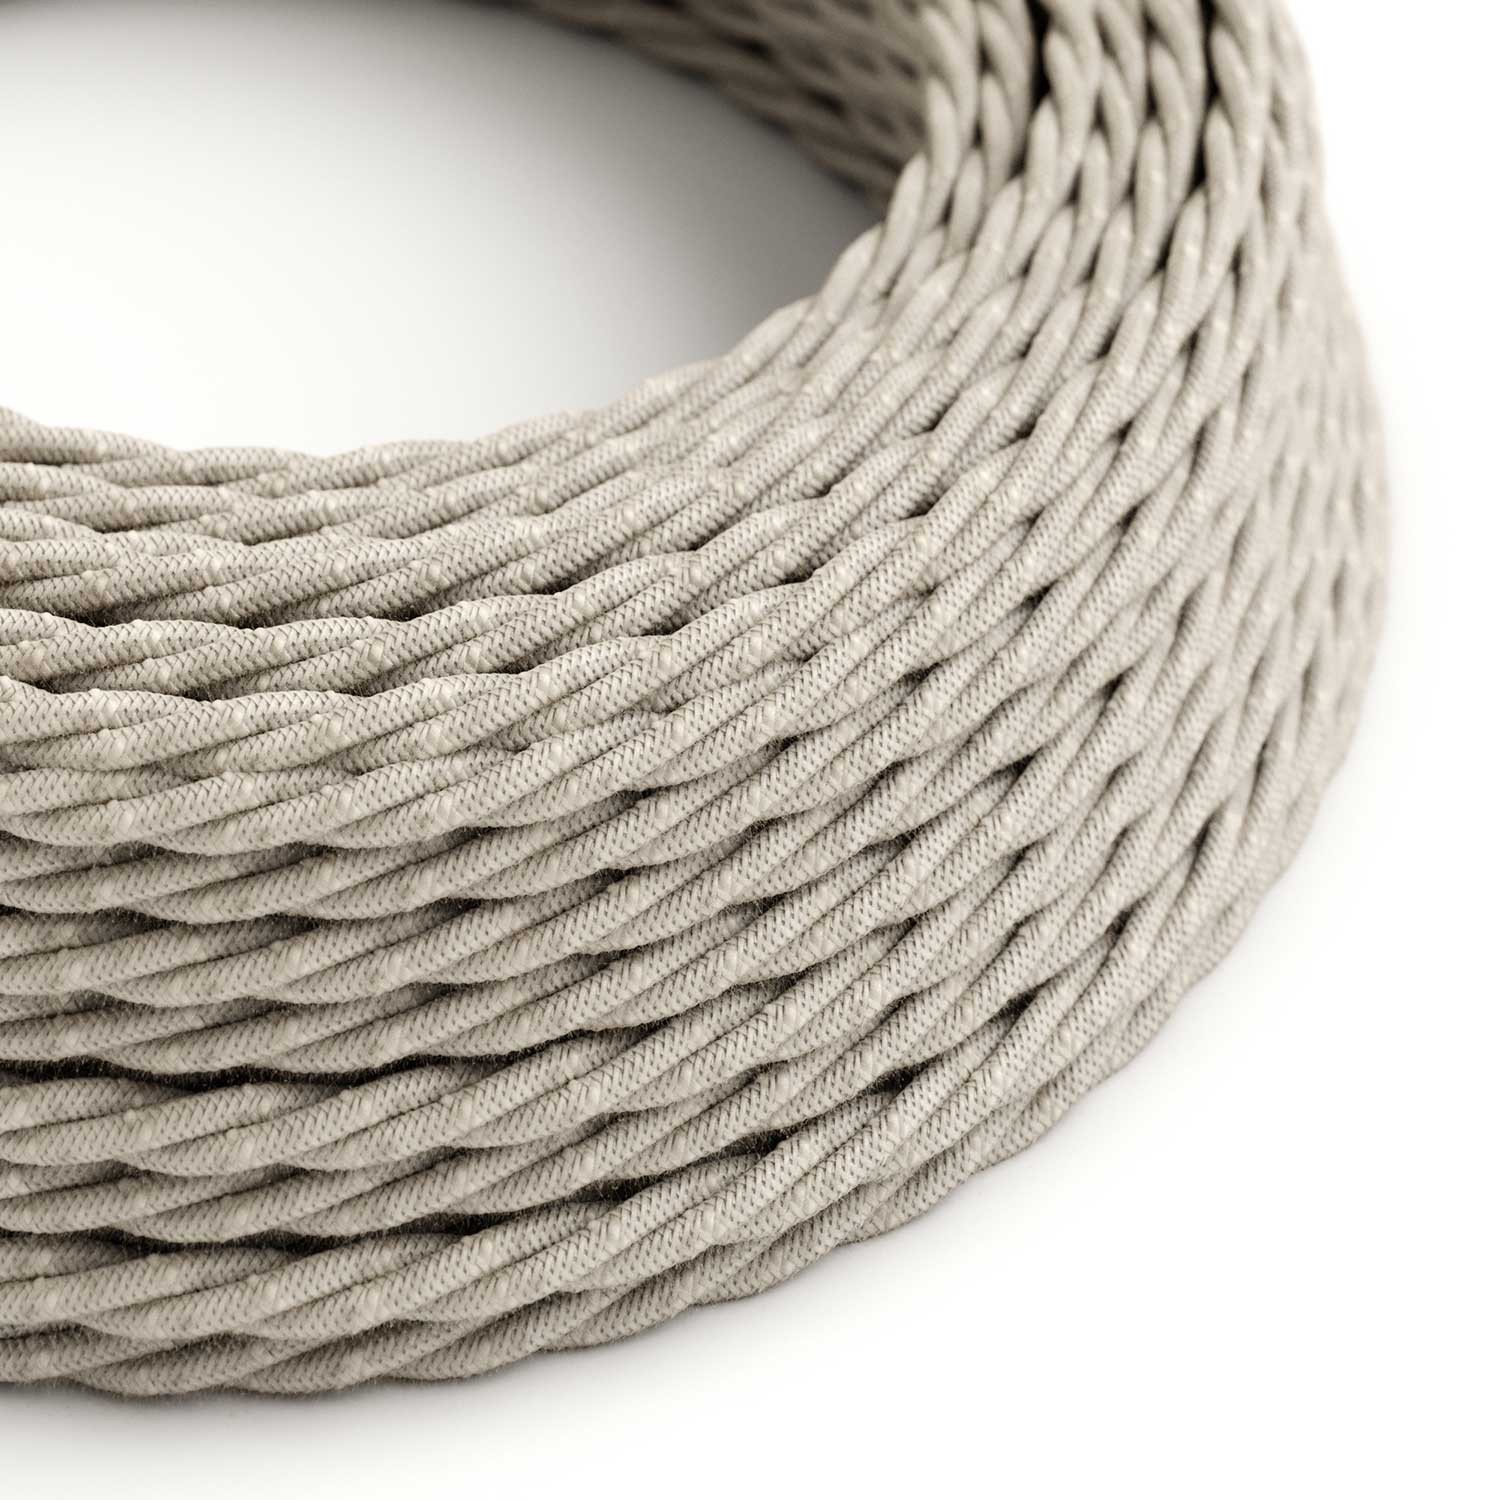 Twisted Electric Cable covered by Natural Linen TN01 Neutral